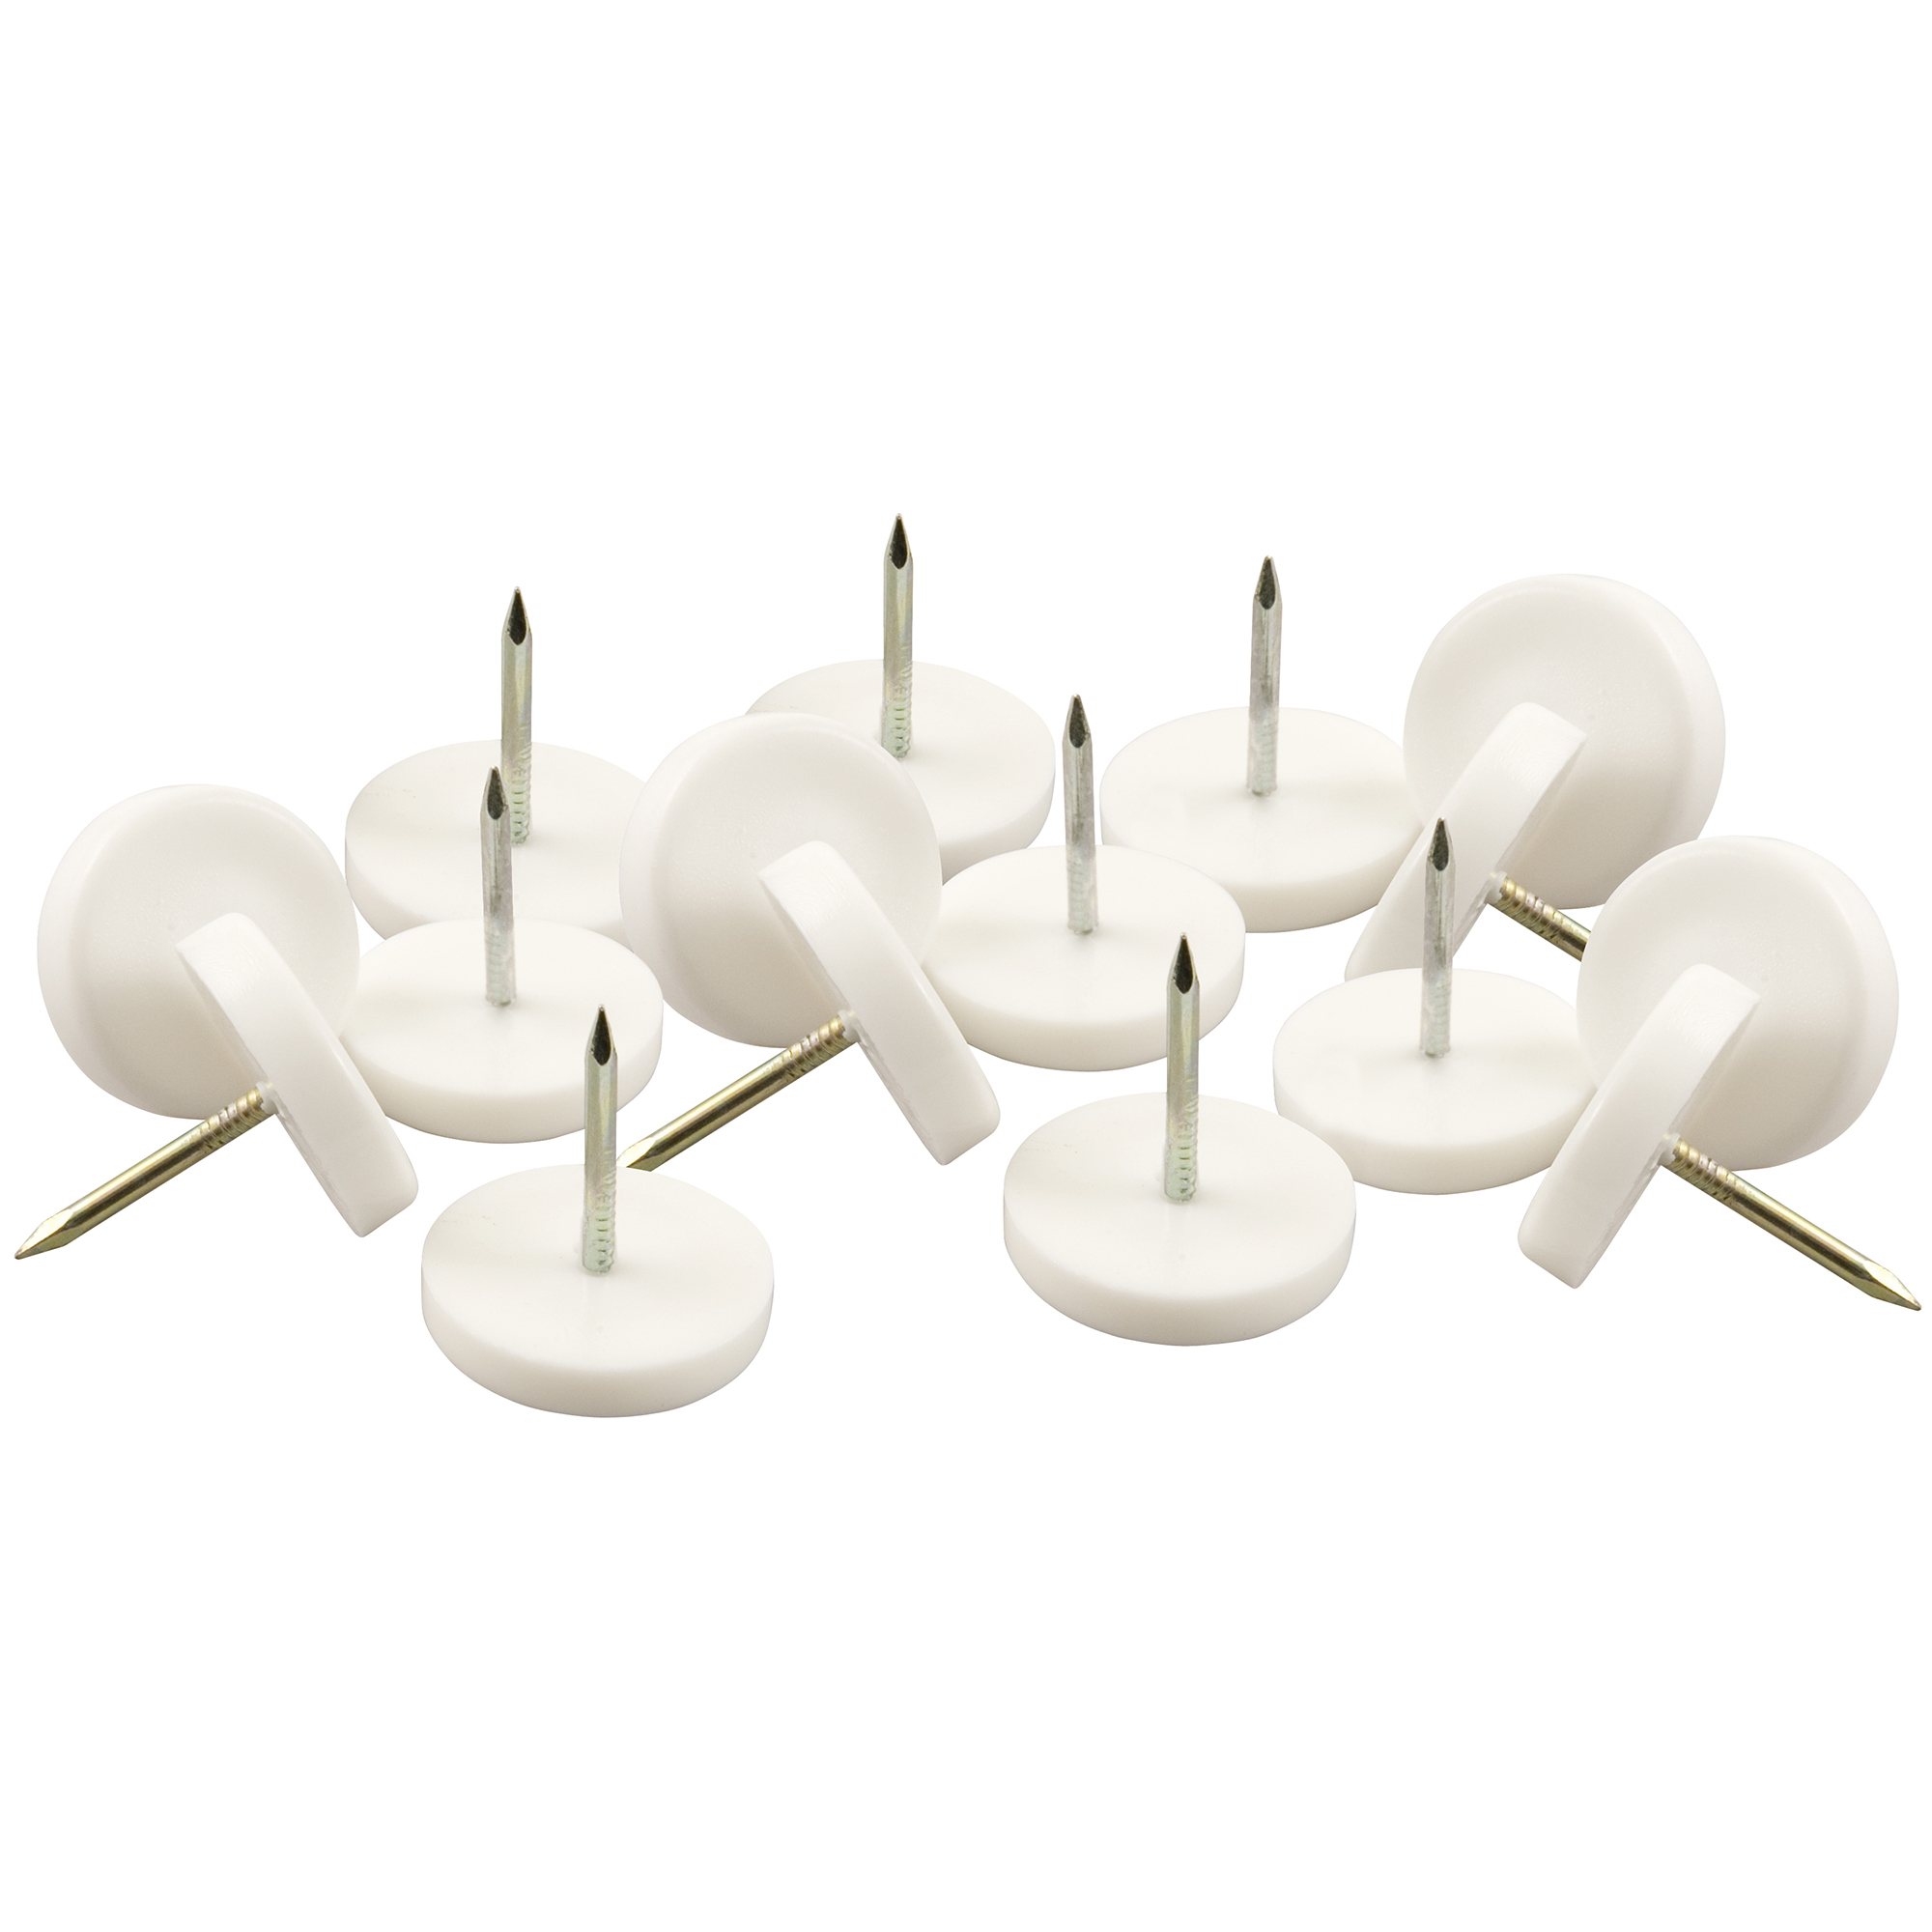 Super Sliders. Size 7/8 inch wide Round Nail on Furniture Glides Plastic, White, 16 Pack - image 5 of 8